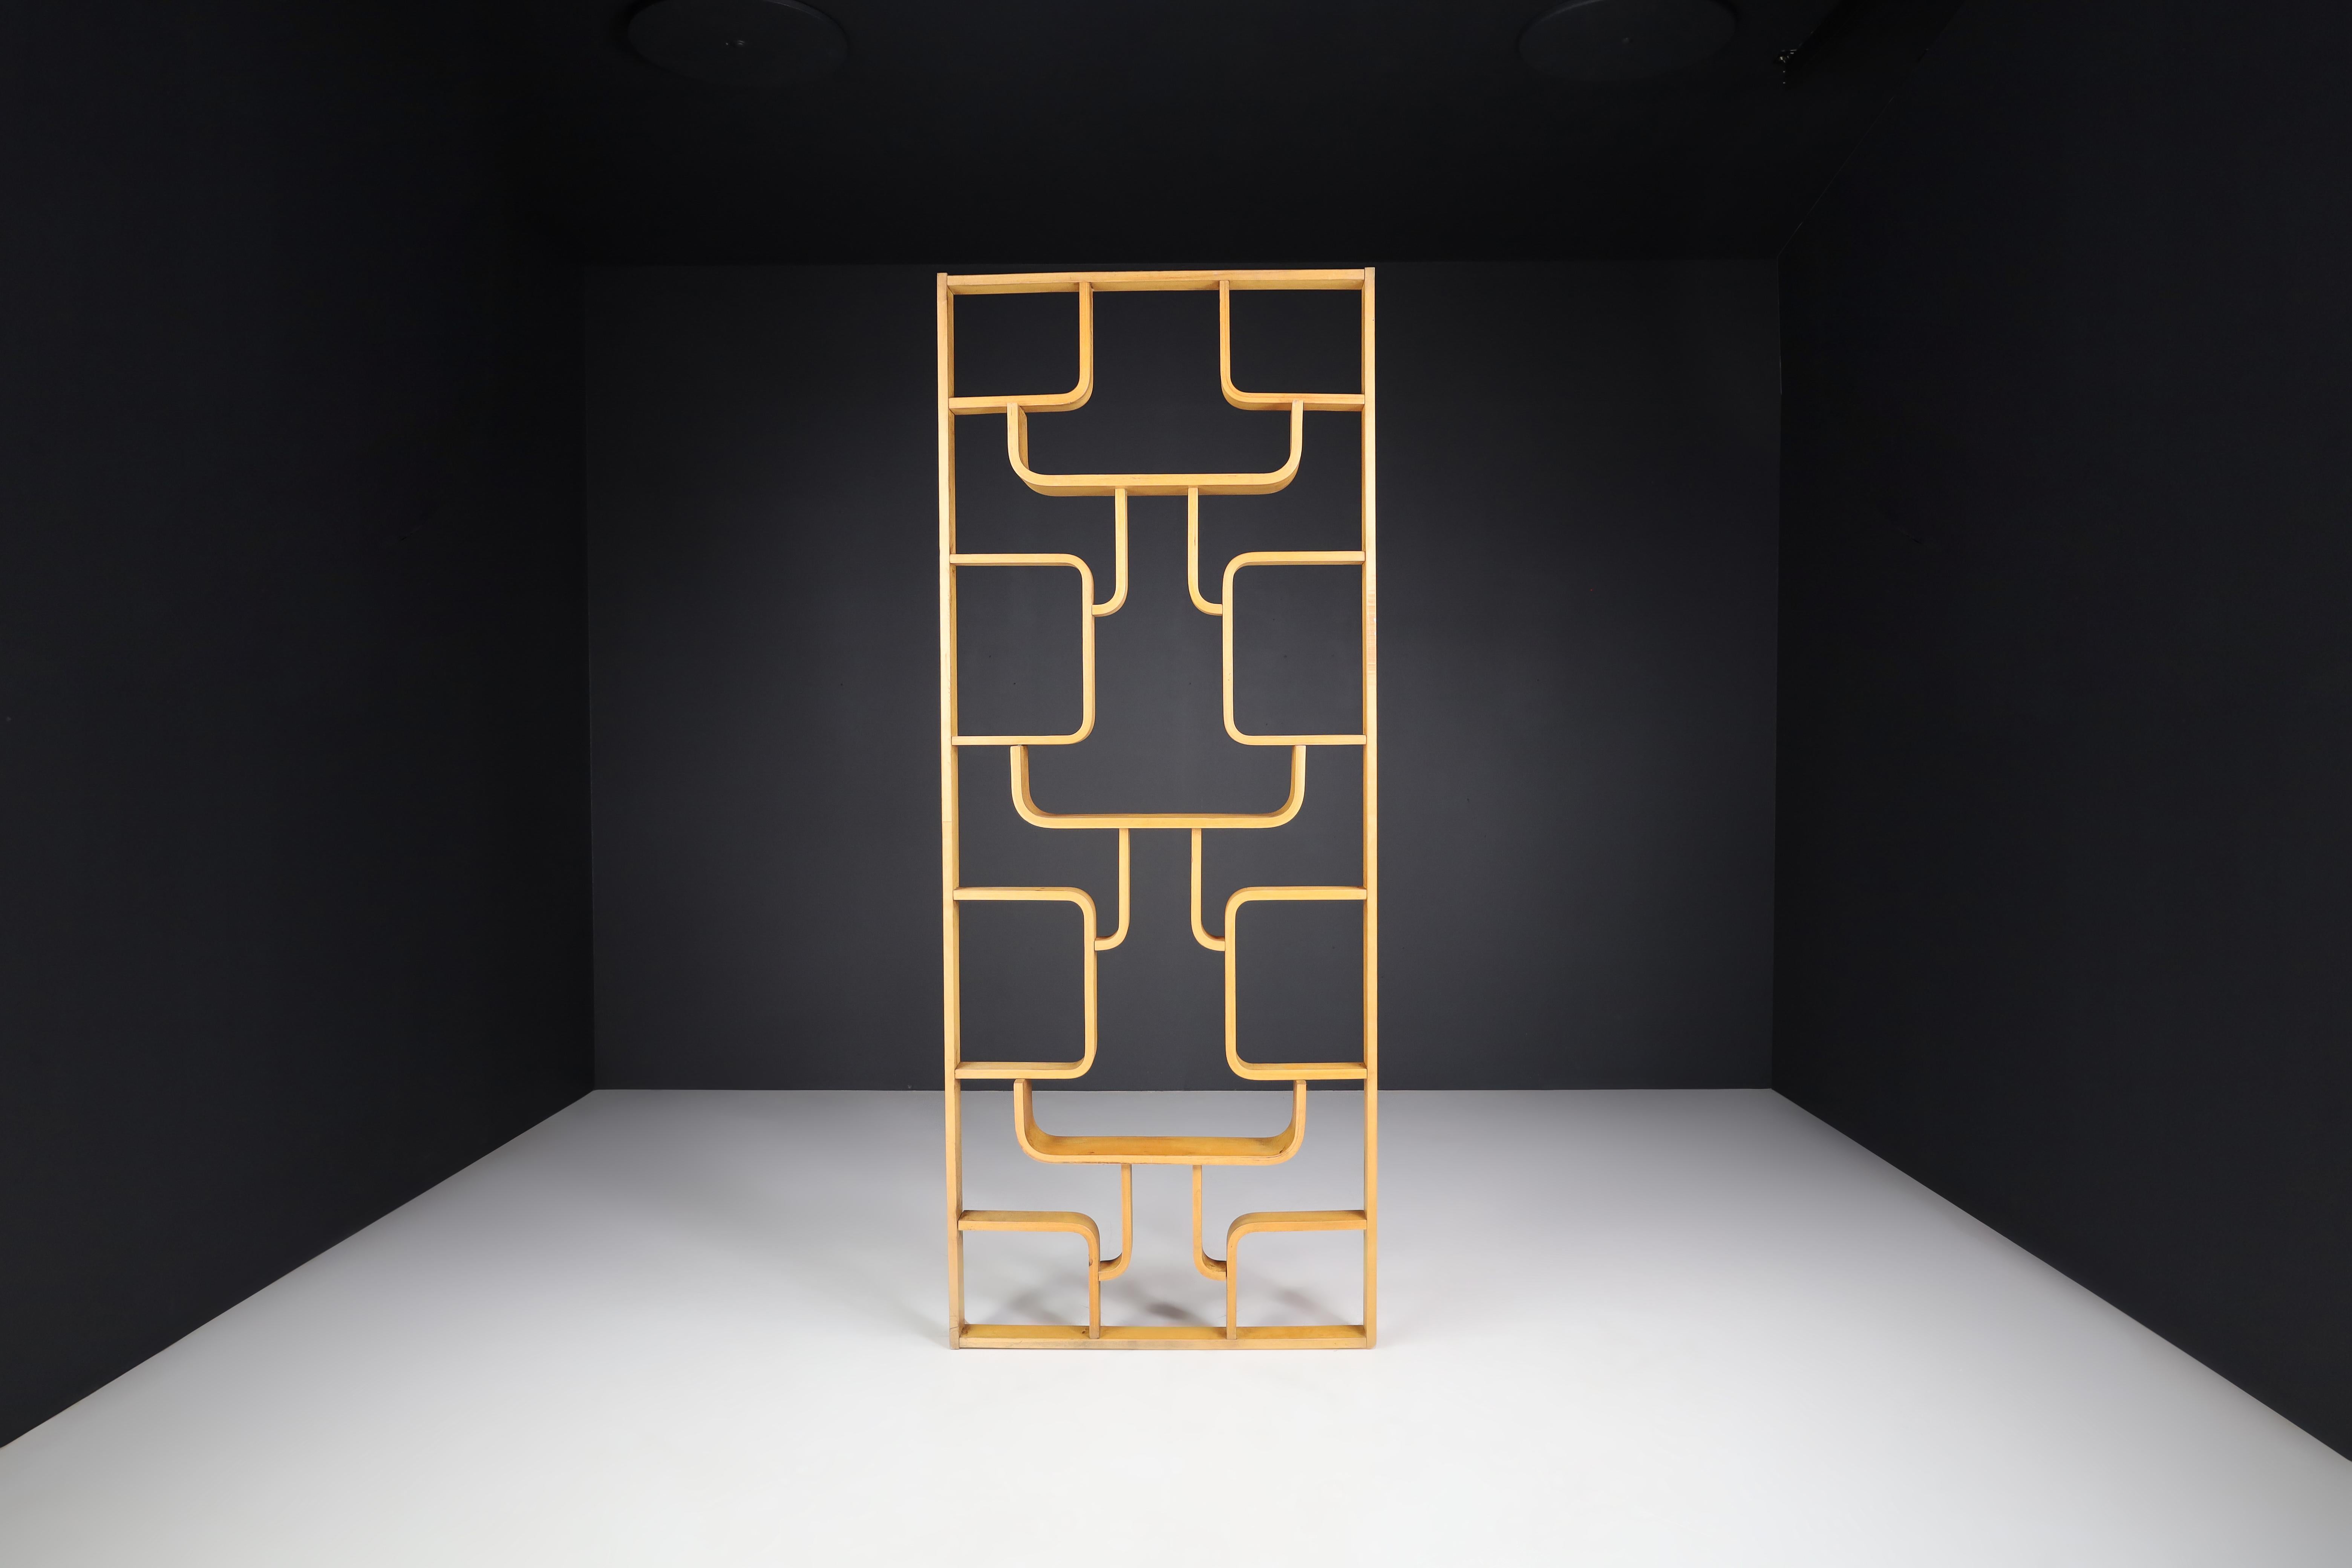 Midcentury room divider in Blond Bent-Wood by Ludvik Volak, Praque 1960s

A memorable blond room divider from a villa in Prague was purchased from the original owner. This object can be used as a wall-mounted shelving unit or room divider. Square